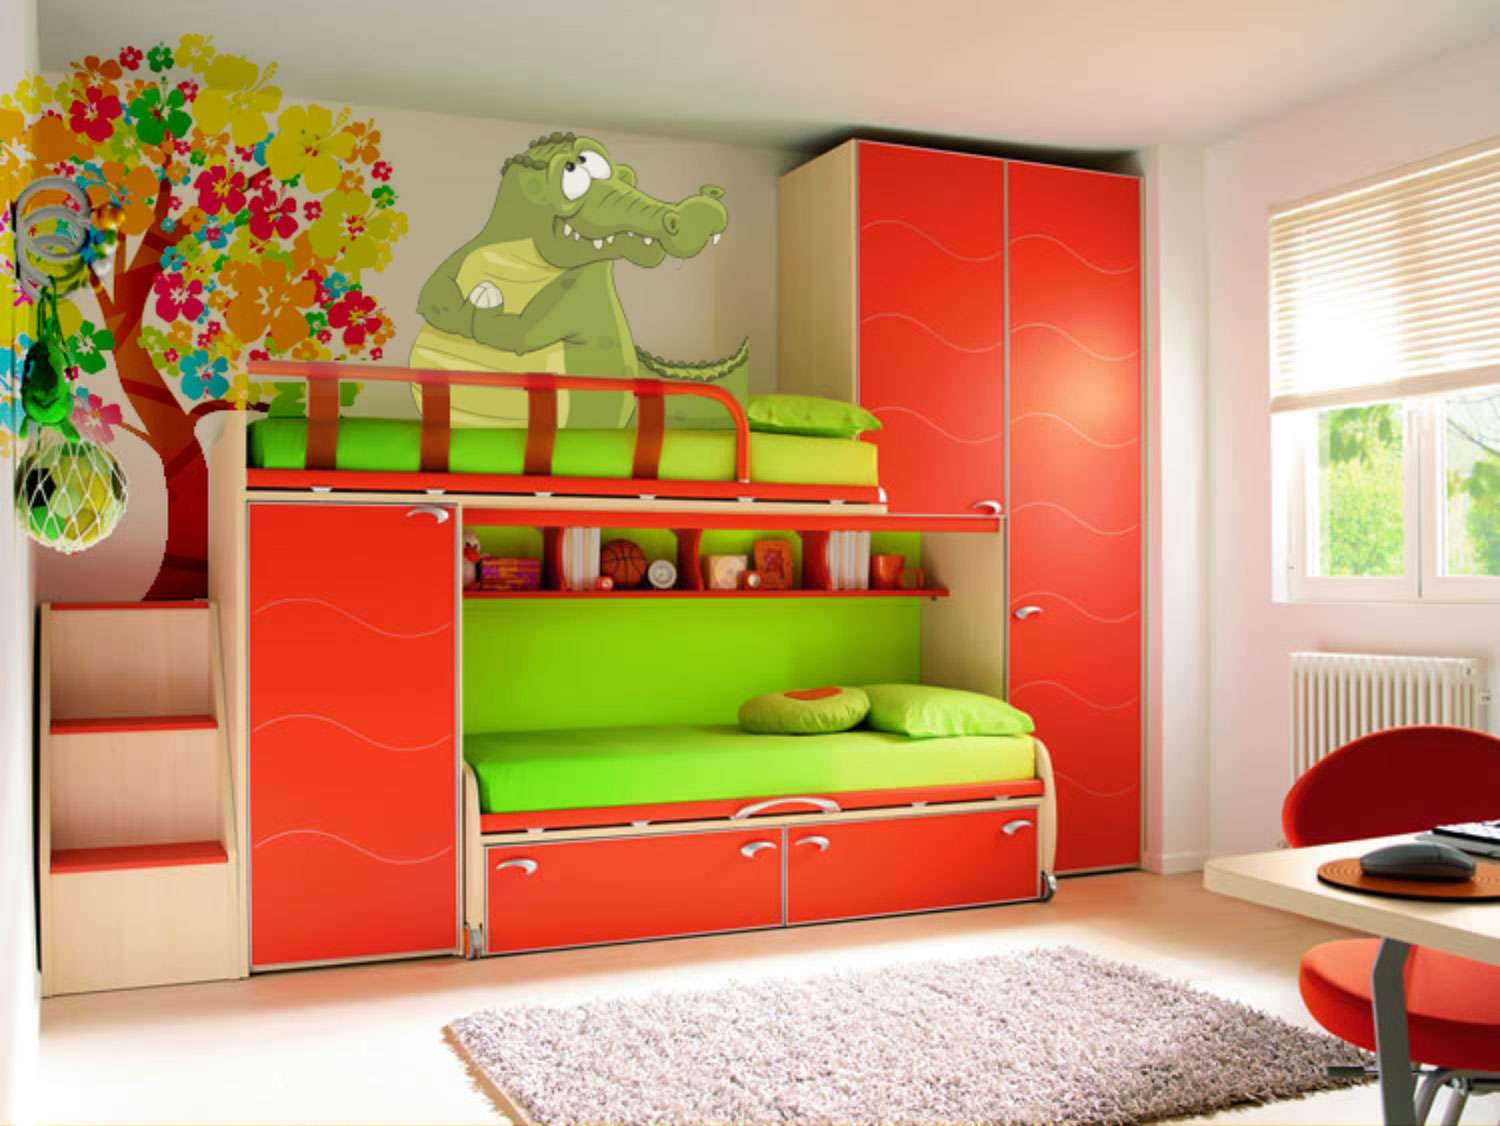 design photo of a nursery for a boy and a girl